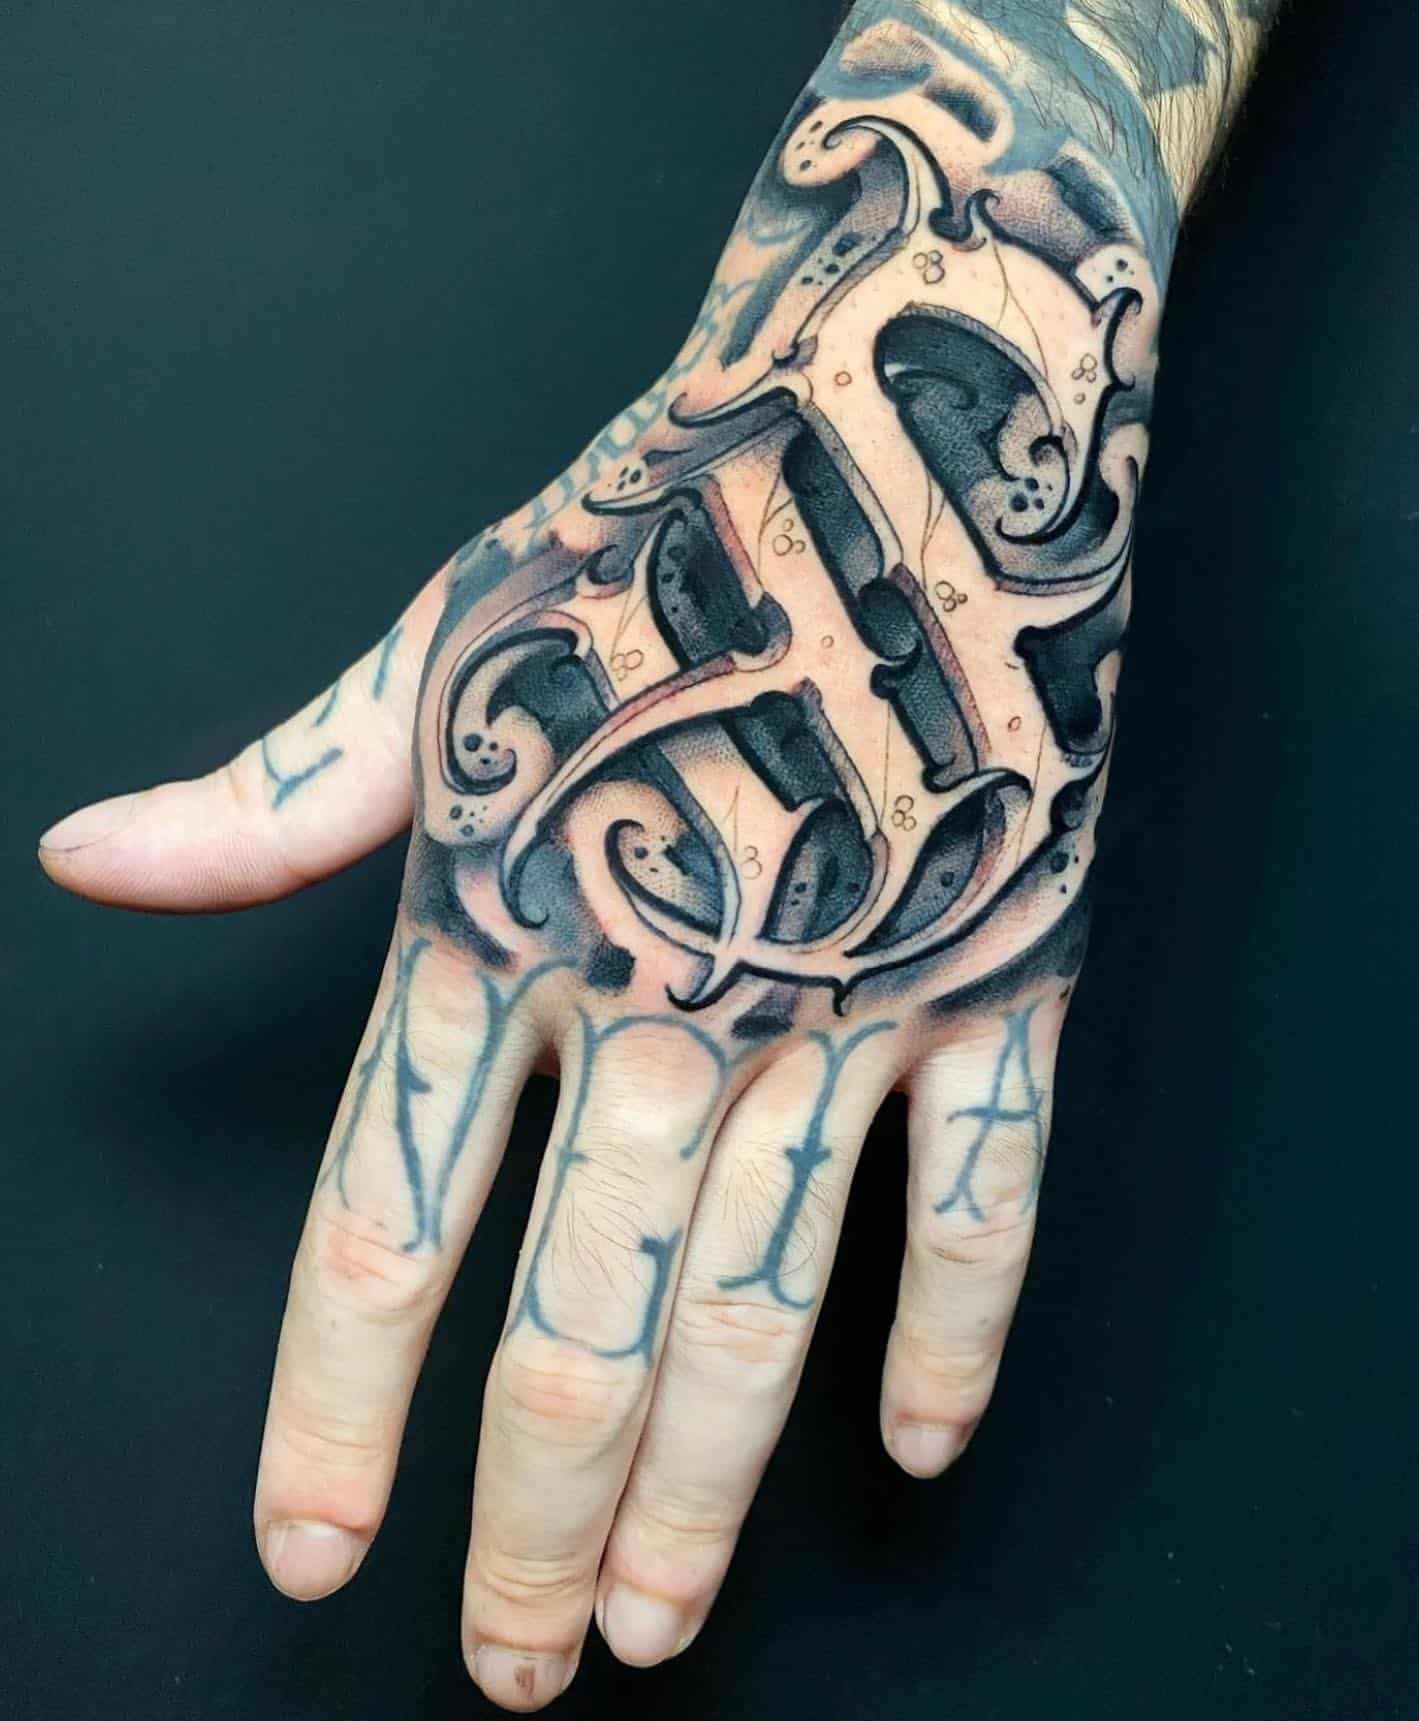 60 Epic Hand Tattoos That Will Drop Jaws  Meanings Designs and Ideas  Hand  tattoos for guys Palm tattoos Tattoos for guys